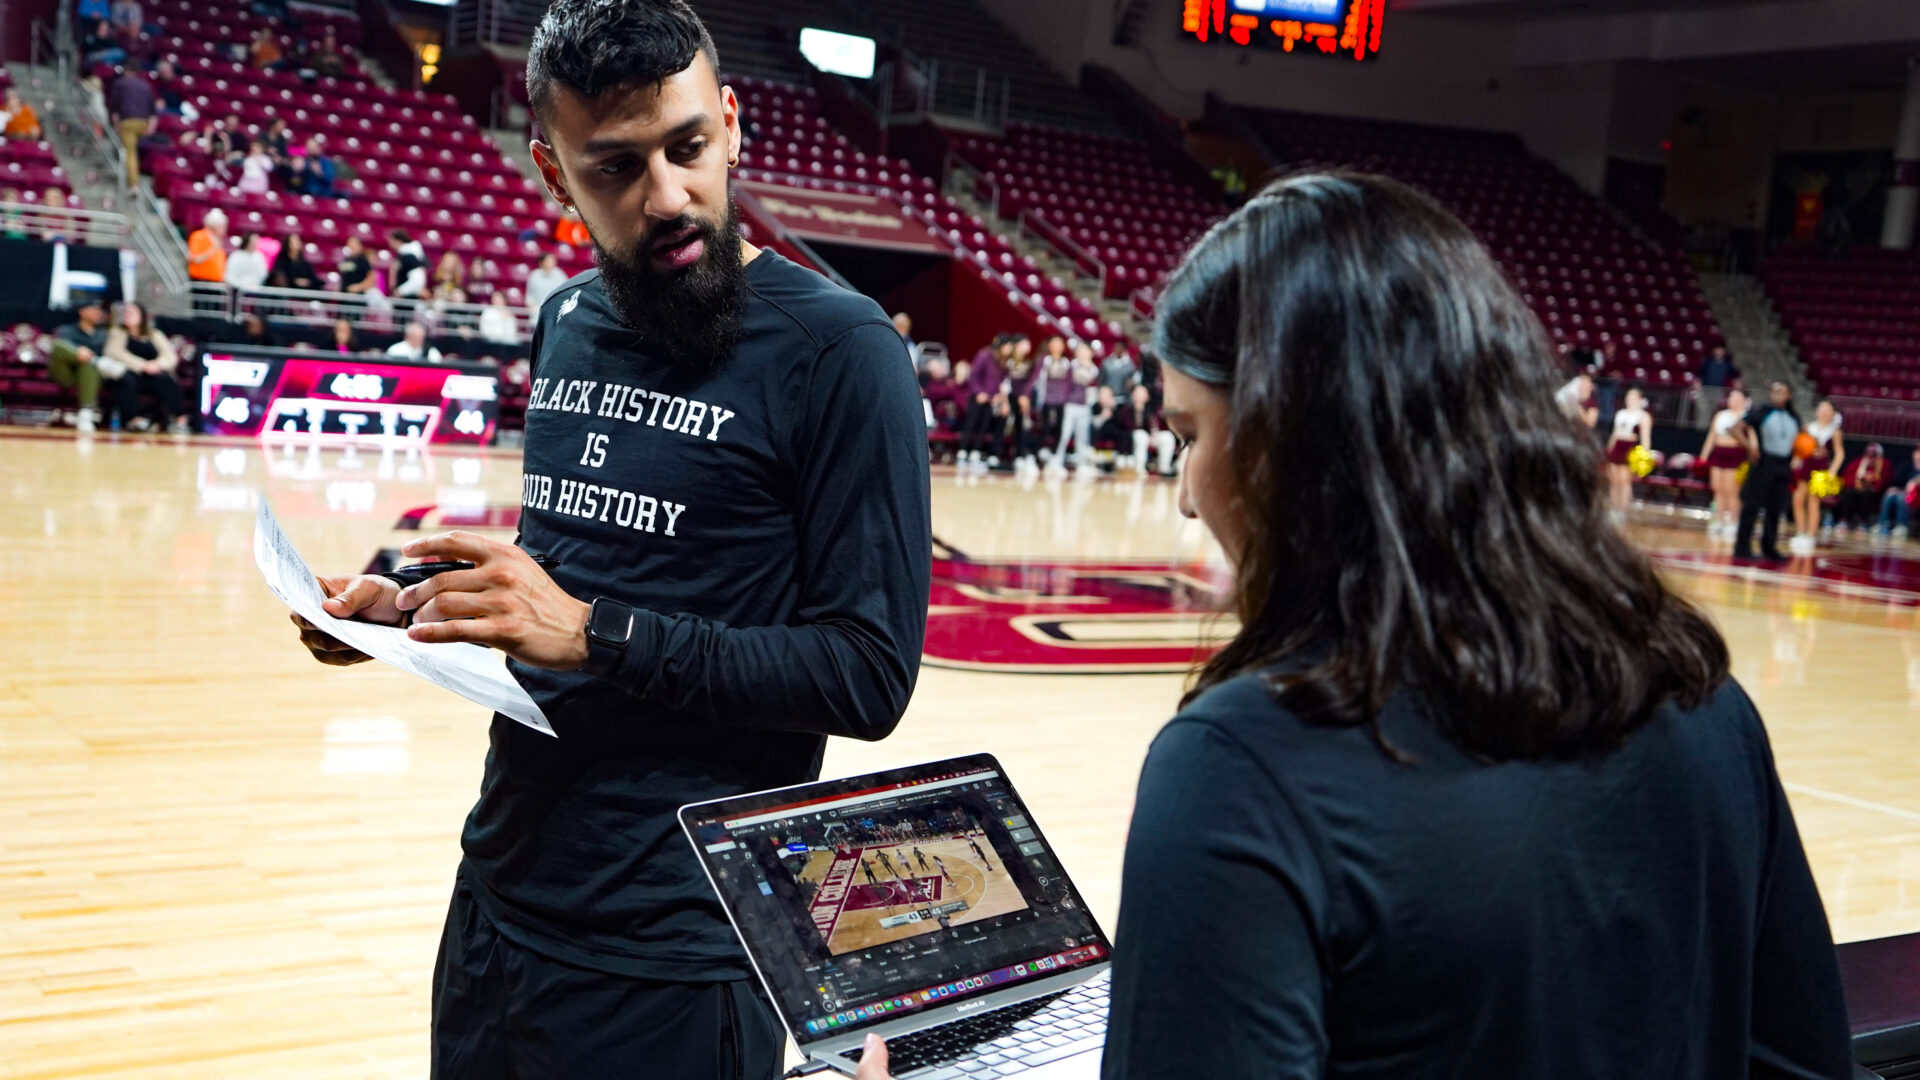 In a dynamic courtside setting, a Boston College team member utilizes the Catapult Pro Video Focus platform on a laptop to engage in real-time basketball video analysis. The live-to-bench workflow is in action, exemplifying how instant sideline analysis empowers teams to make swift strategic decisions.